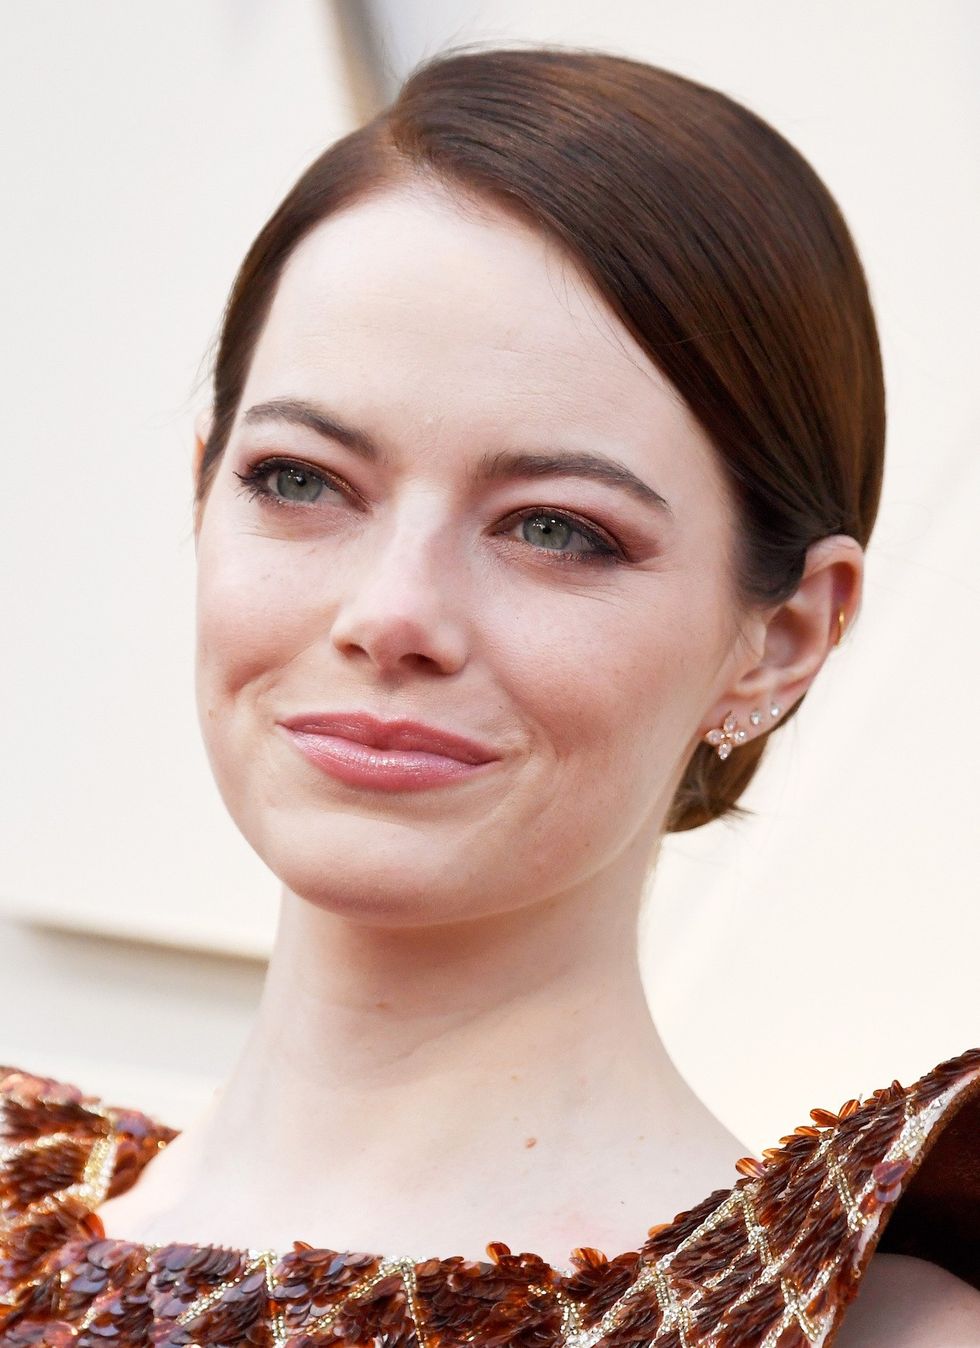 emma stone at the oscars for the favourite